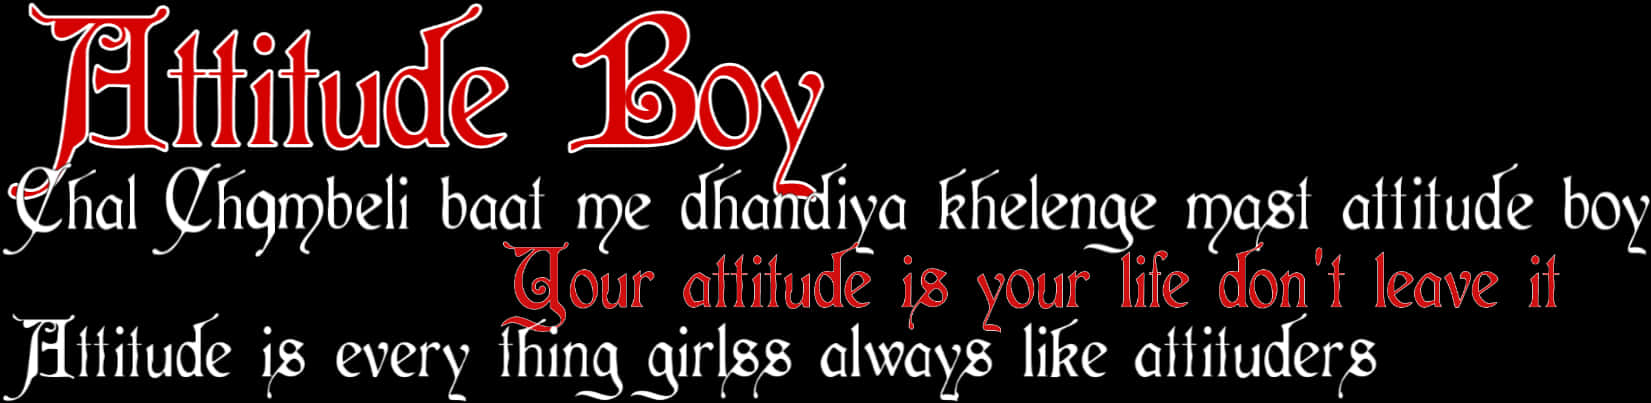 Attitude Boy Graphic Banner PNG